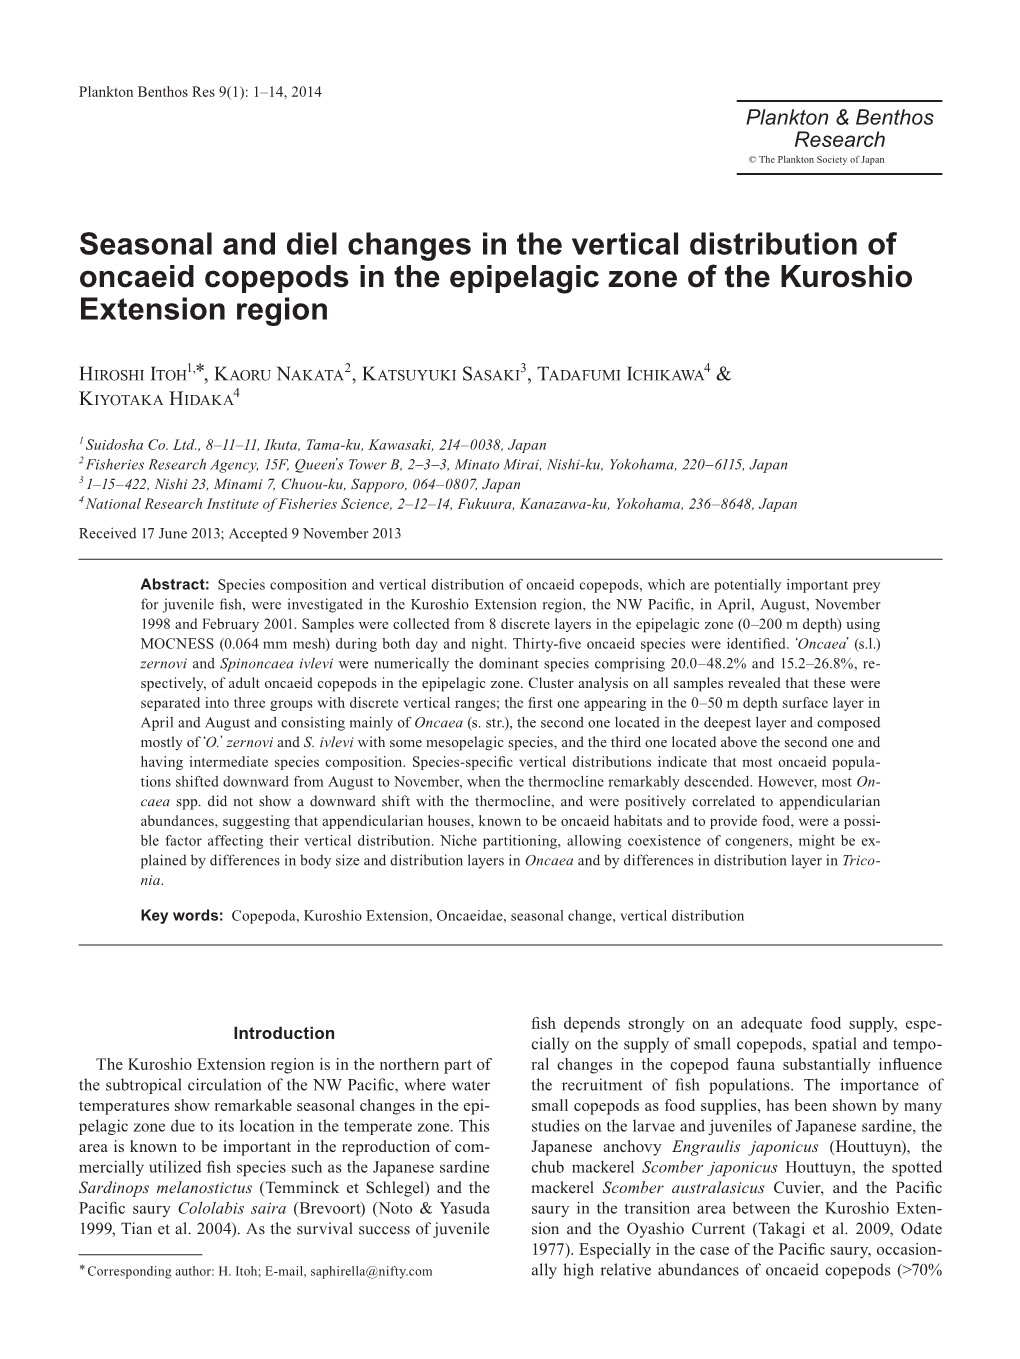 Seasonal and Diel Changes in the Vertical Distribution of Oncaeid Copepods in the Epipelagic Zone of the Kuroshio Extension Region